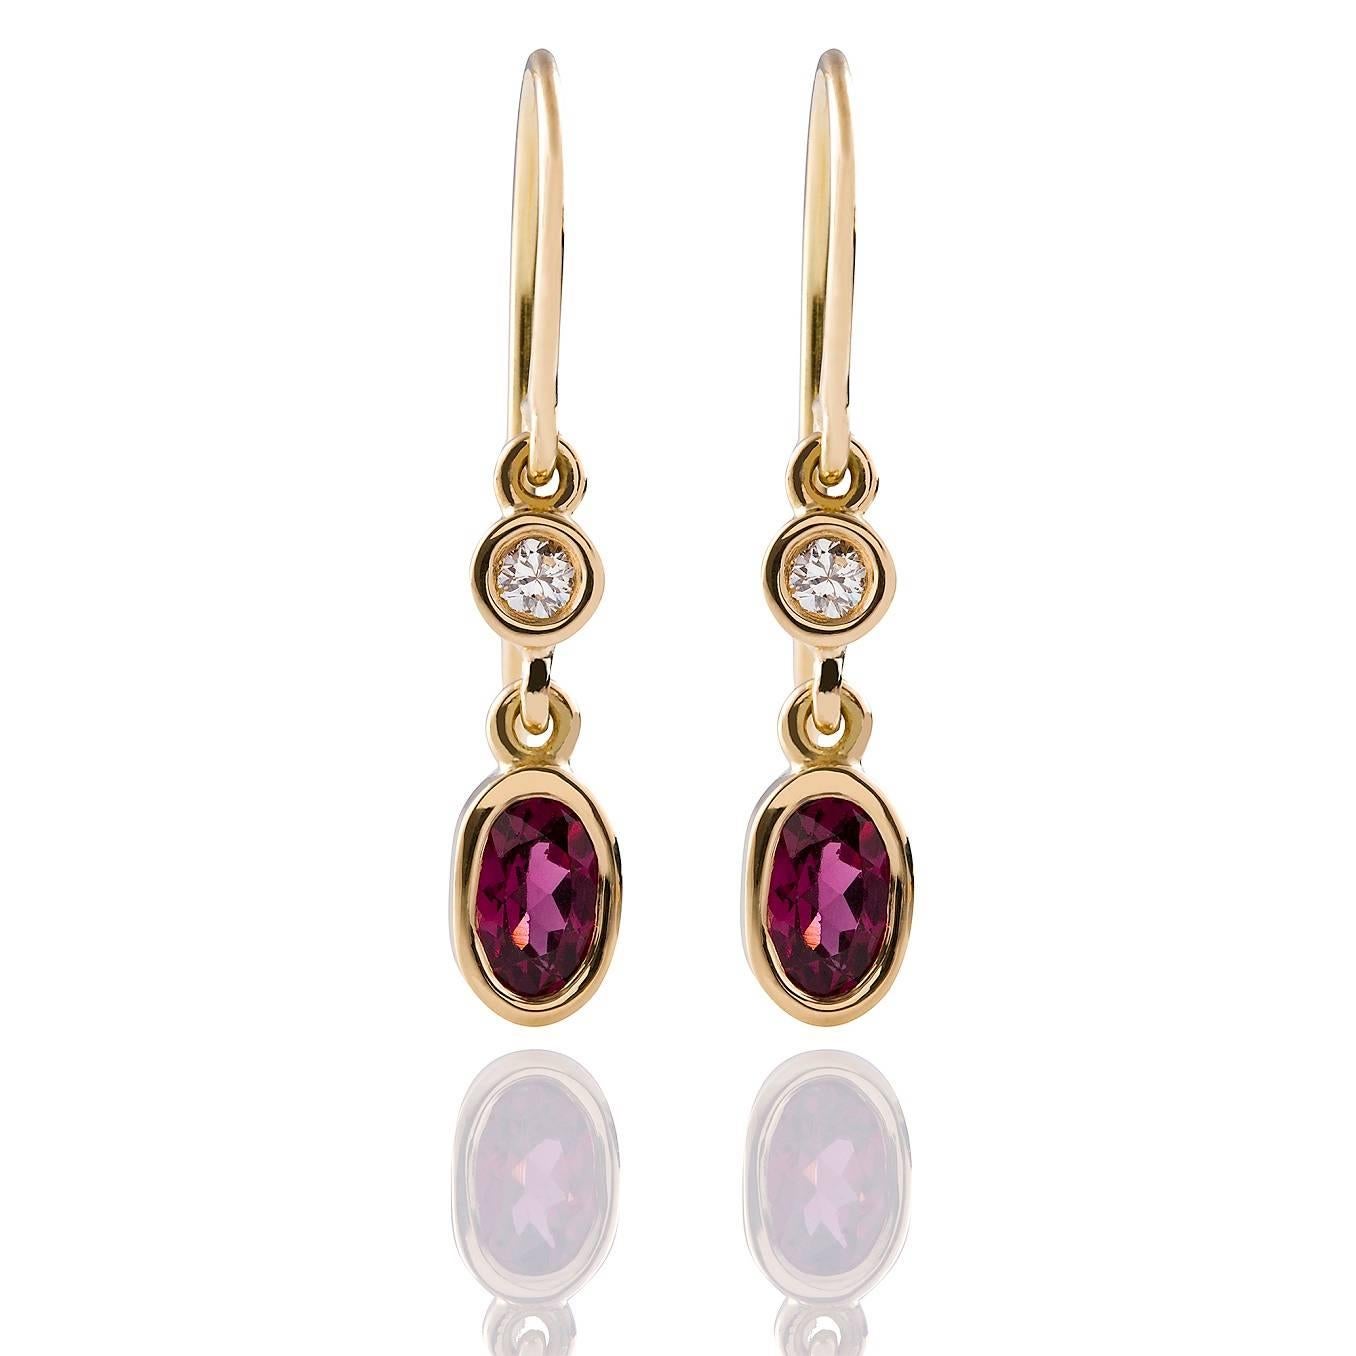 Rosa Granato Earrings

These gorgeous drop style earrings in 18 carat yellow gold each have a beautiful chenier set rhodolite garnet and diamond pair.

Oval faceted rhodolite garnets: medium pink colour, 6.0 x 4.0mm each

Round brilliant cut